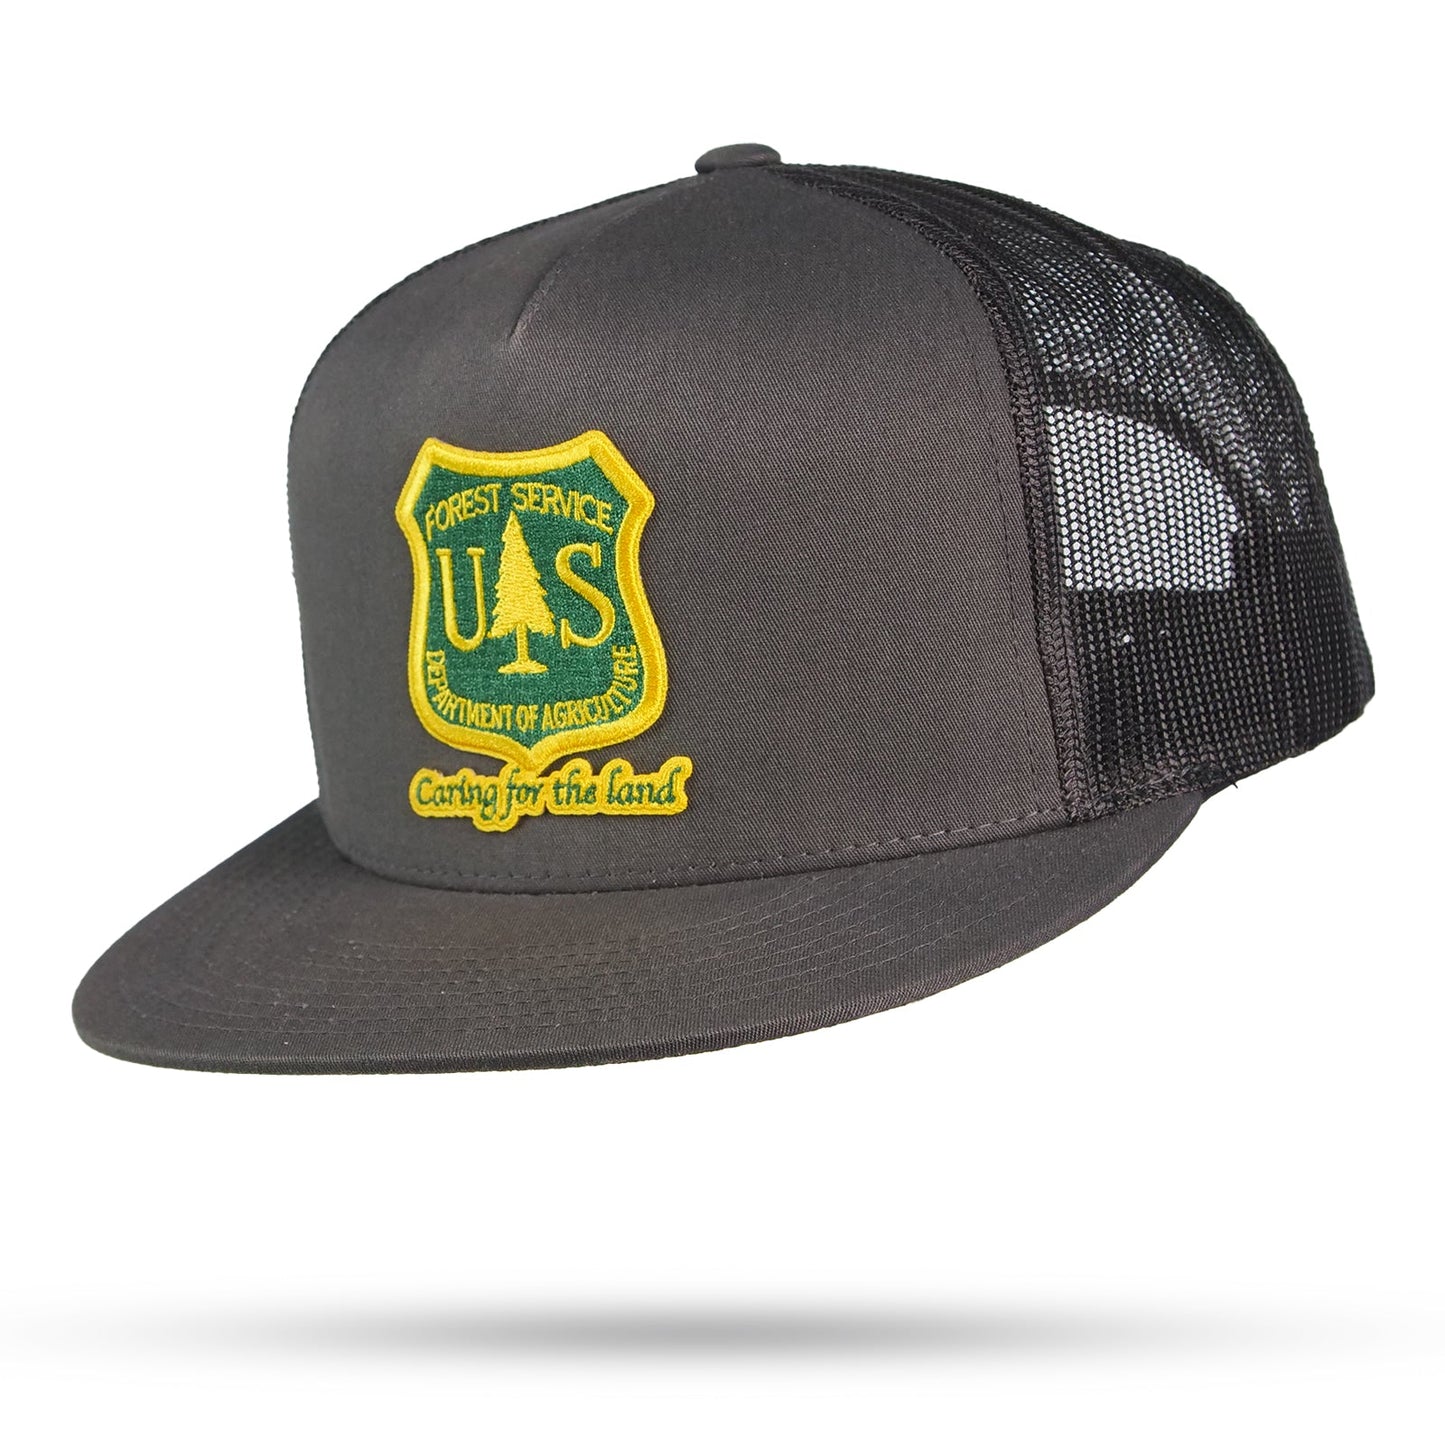 USFS Caring for the Land Yupoong Flatbill Trucker w/ Embroidered Patch - WYR